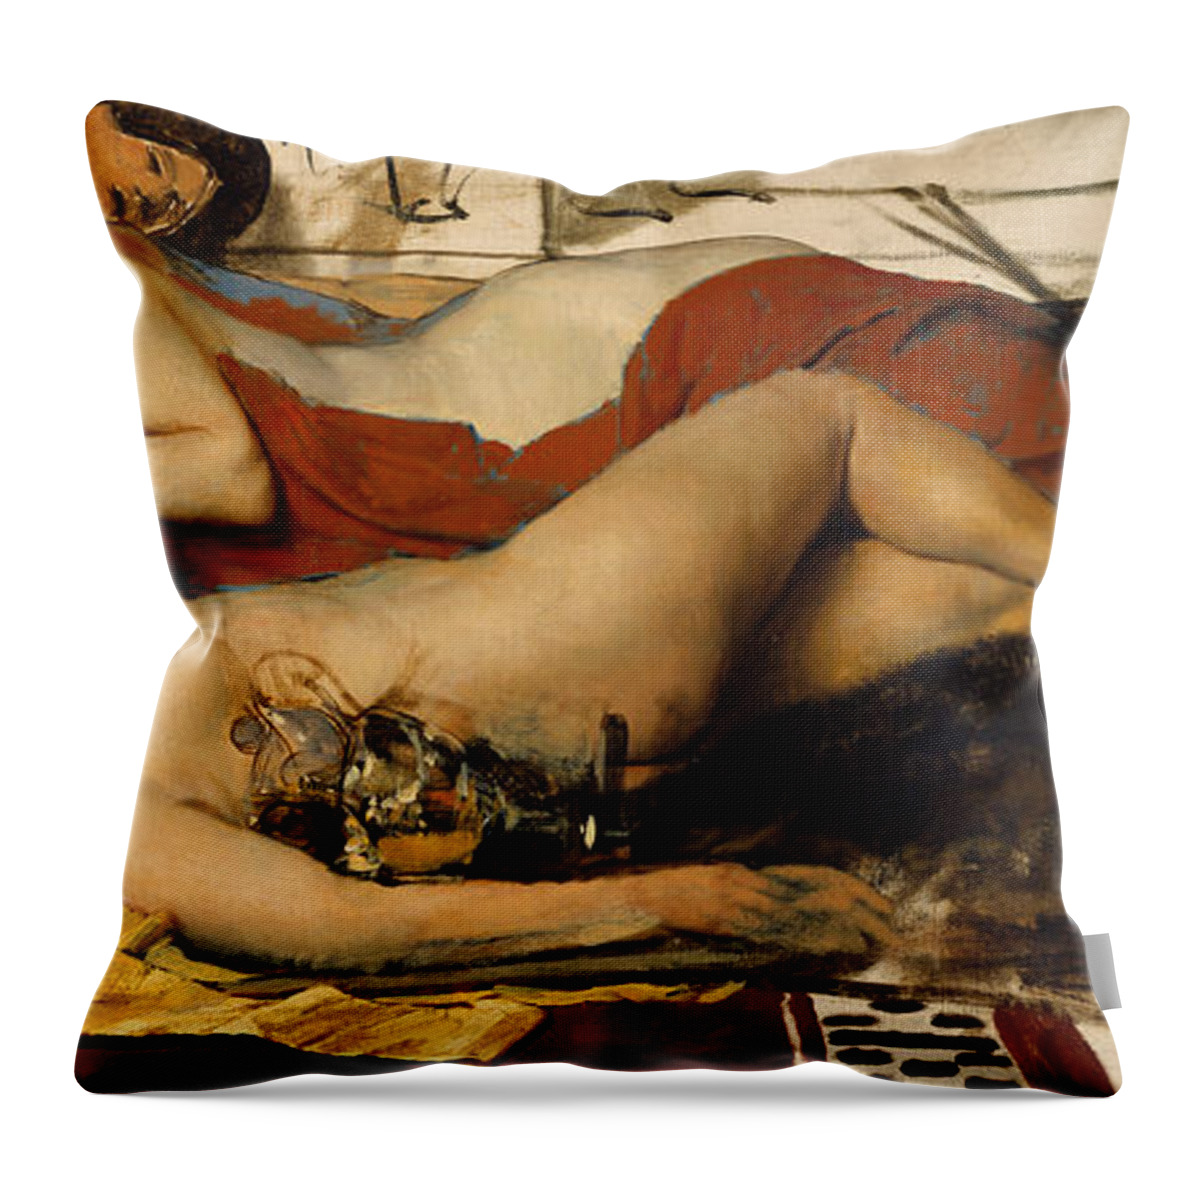 Nude Throw Pillow featuring the painting Exhausted Maenides by Lawrence Alma Tadema